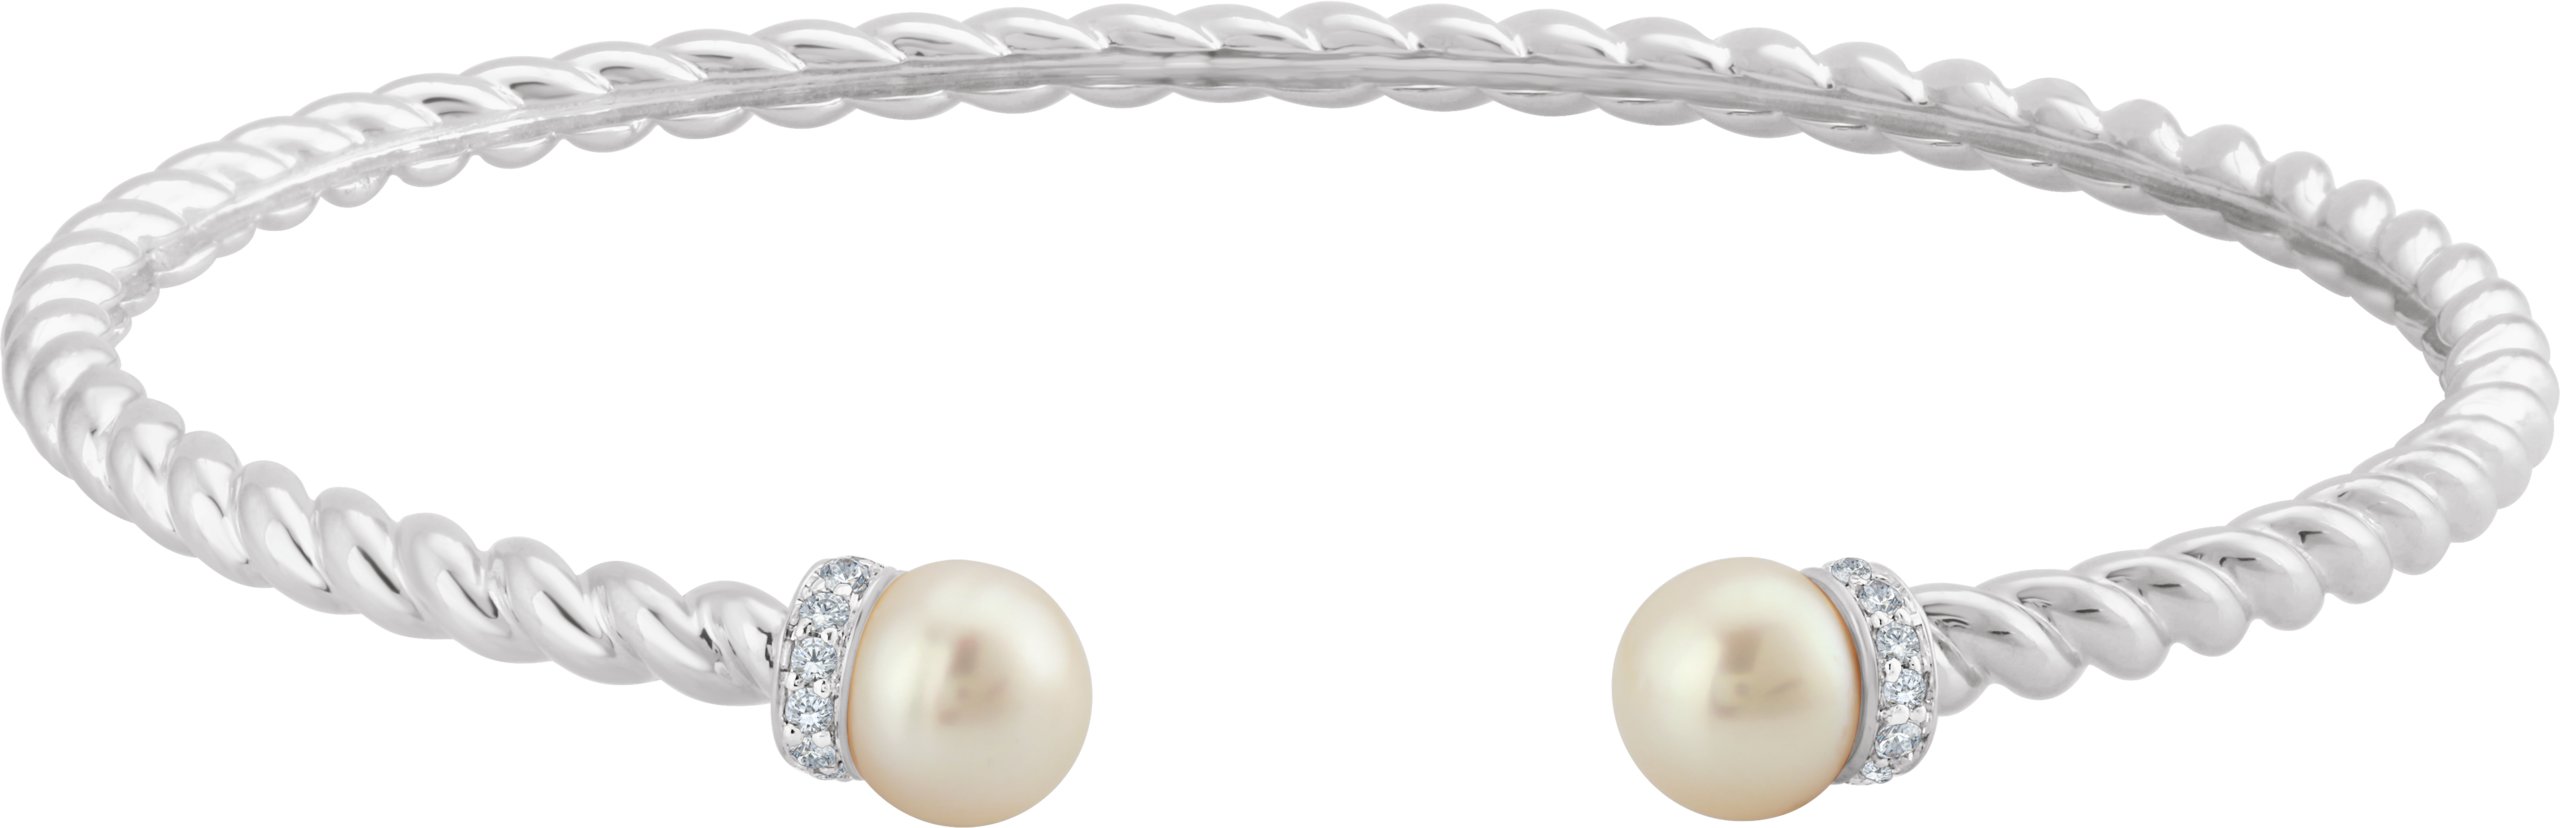 14K White Freshwater Cultured Pearl and .10 CTW Diamond Cuff Bracelet Ref. 12997488